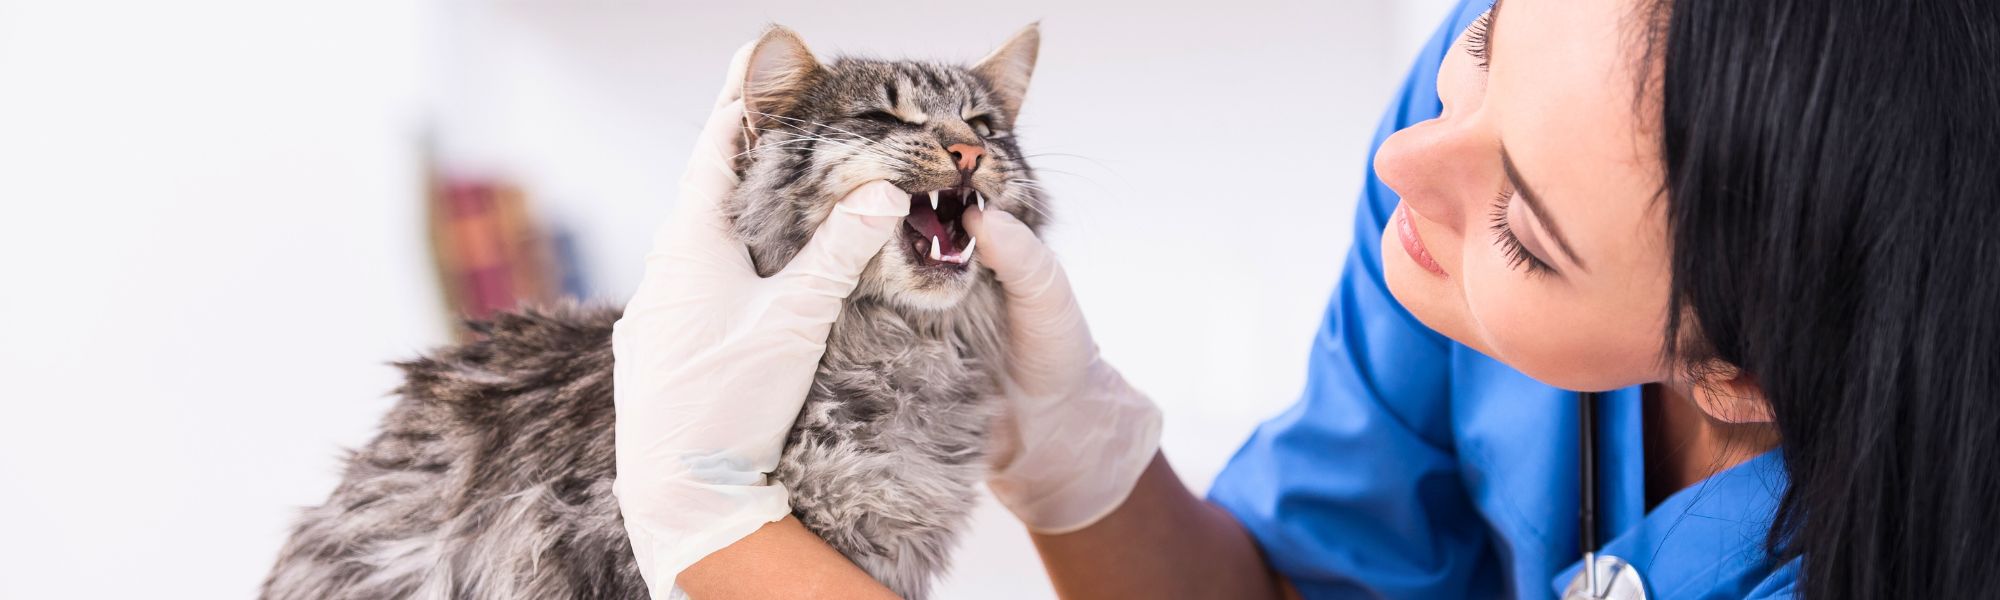 Vet assistant checking a cat's teeth